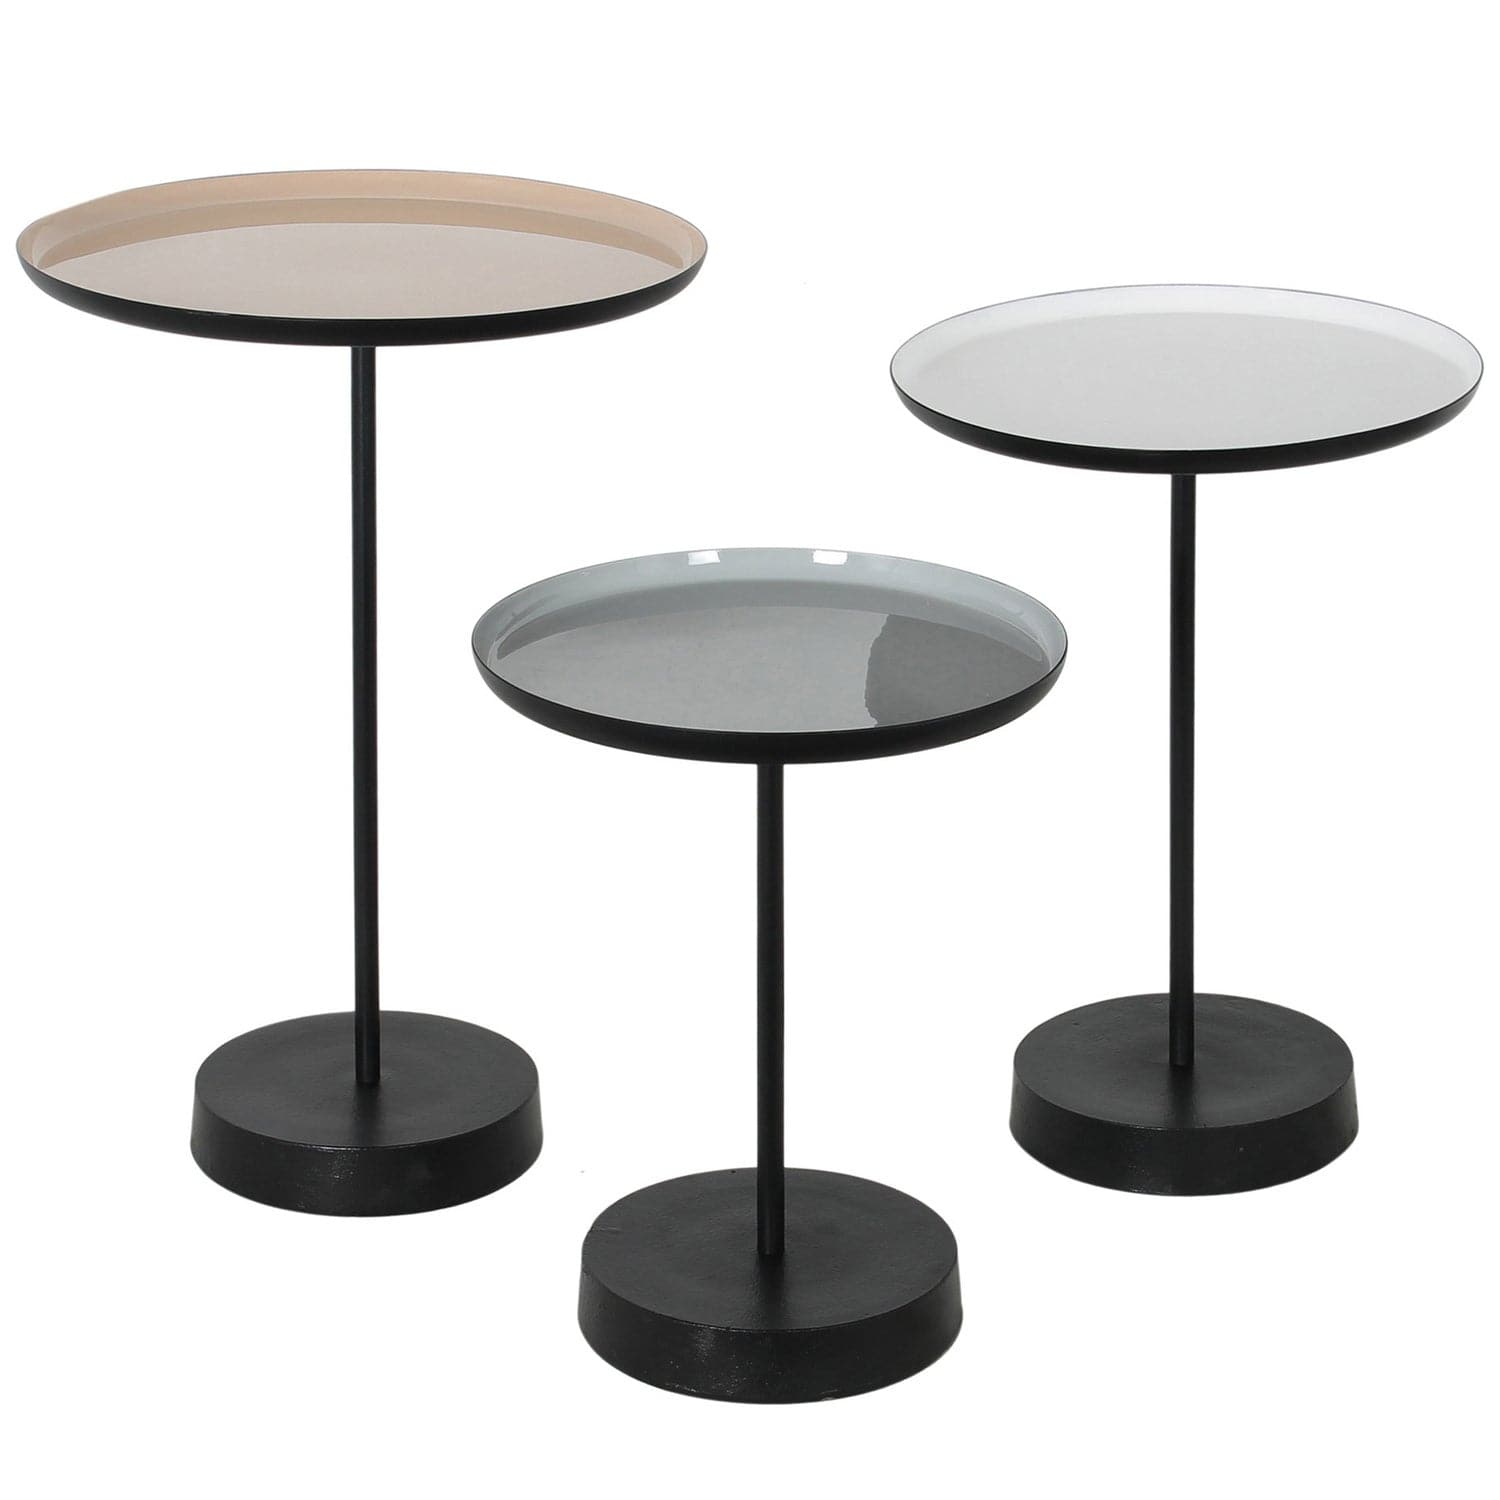 Renwil - TA111 - Accent Table - Stepping Stone - White/Beige/Grey Powder Coated/ Enamel